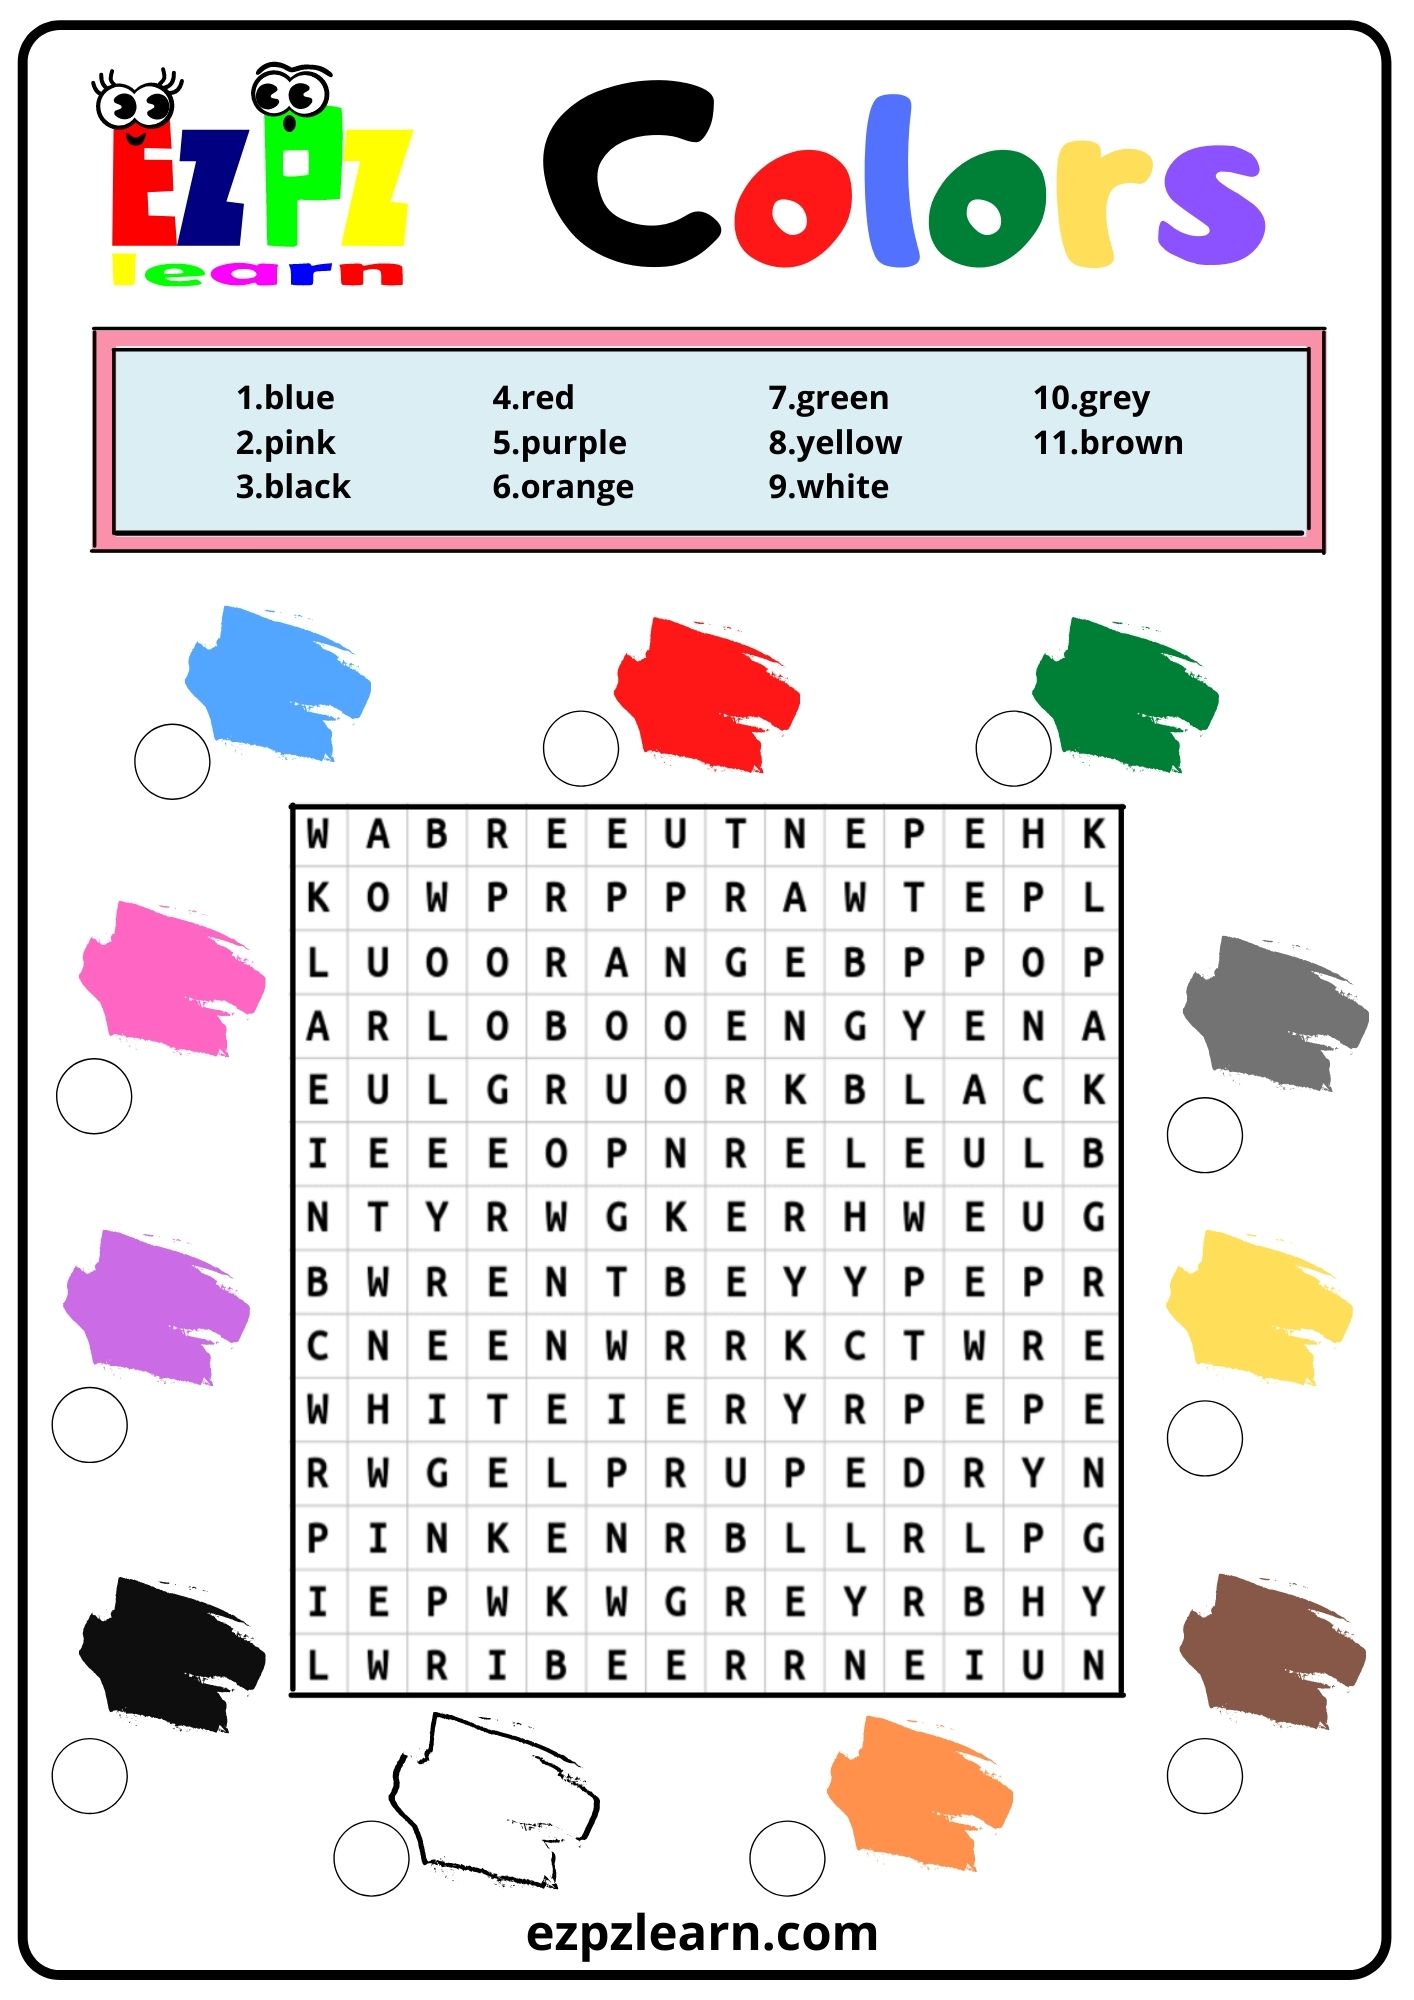 Colors Word Search 2